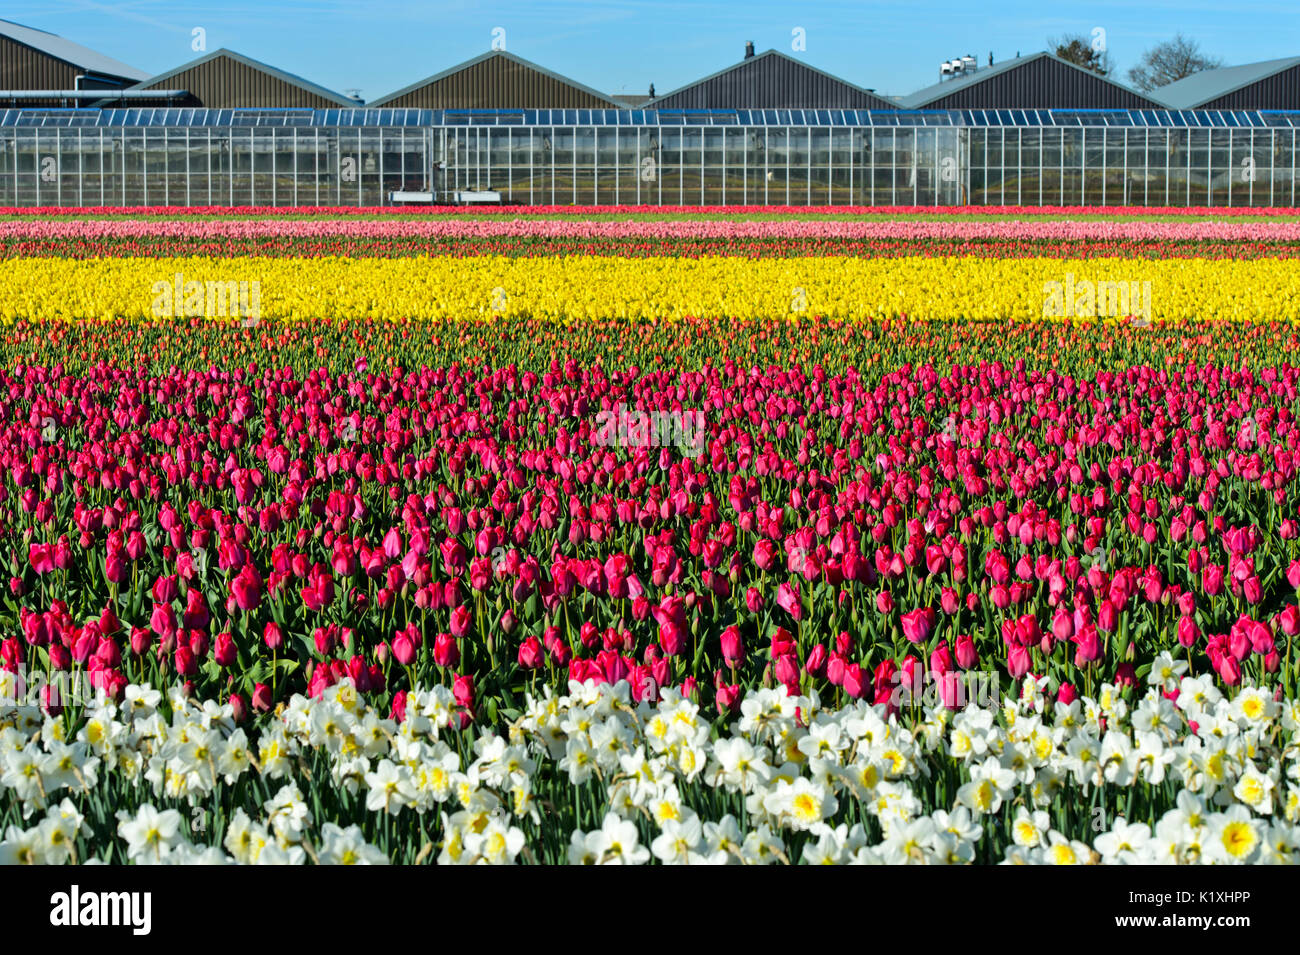 Cultivation of daffodils and tulips for the production of flower bulbs in the Bollenstreek area, plant nursery behind, Noordwijkerhout, Netherlands Stock Photo